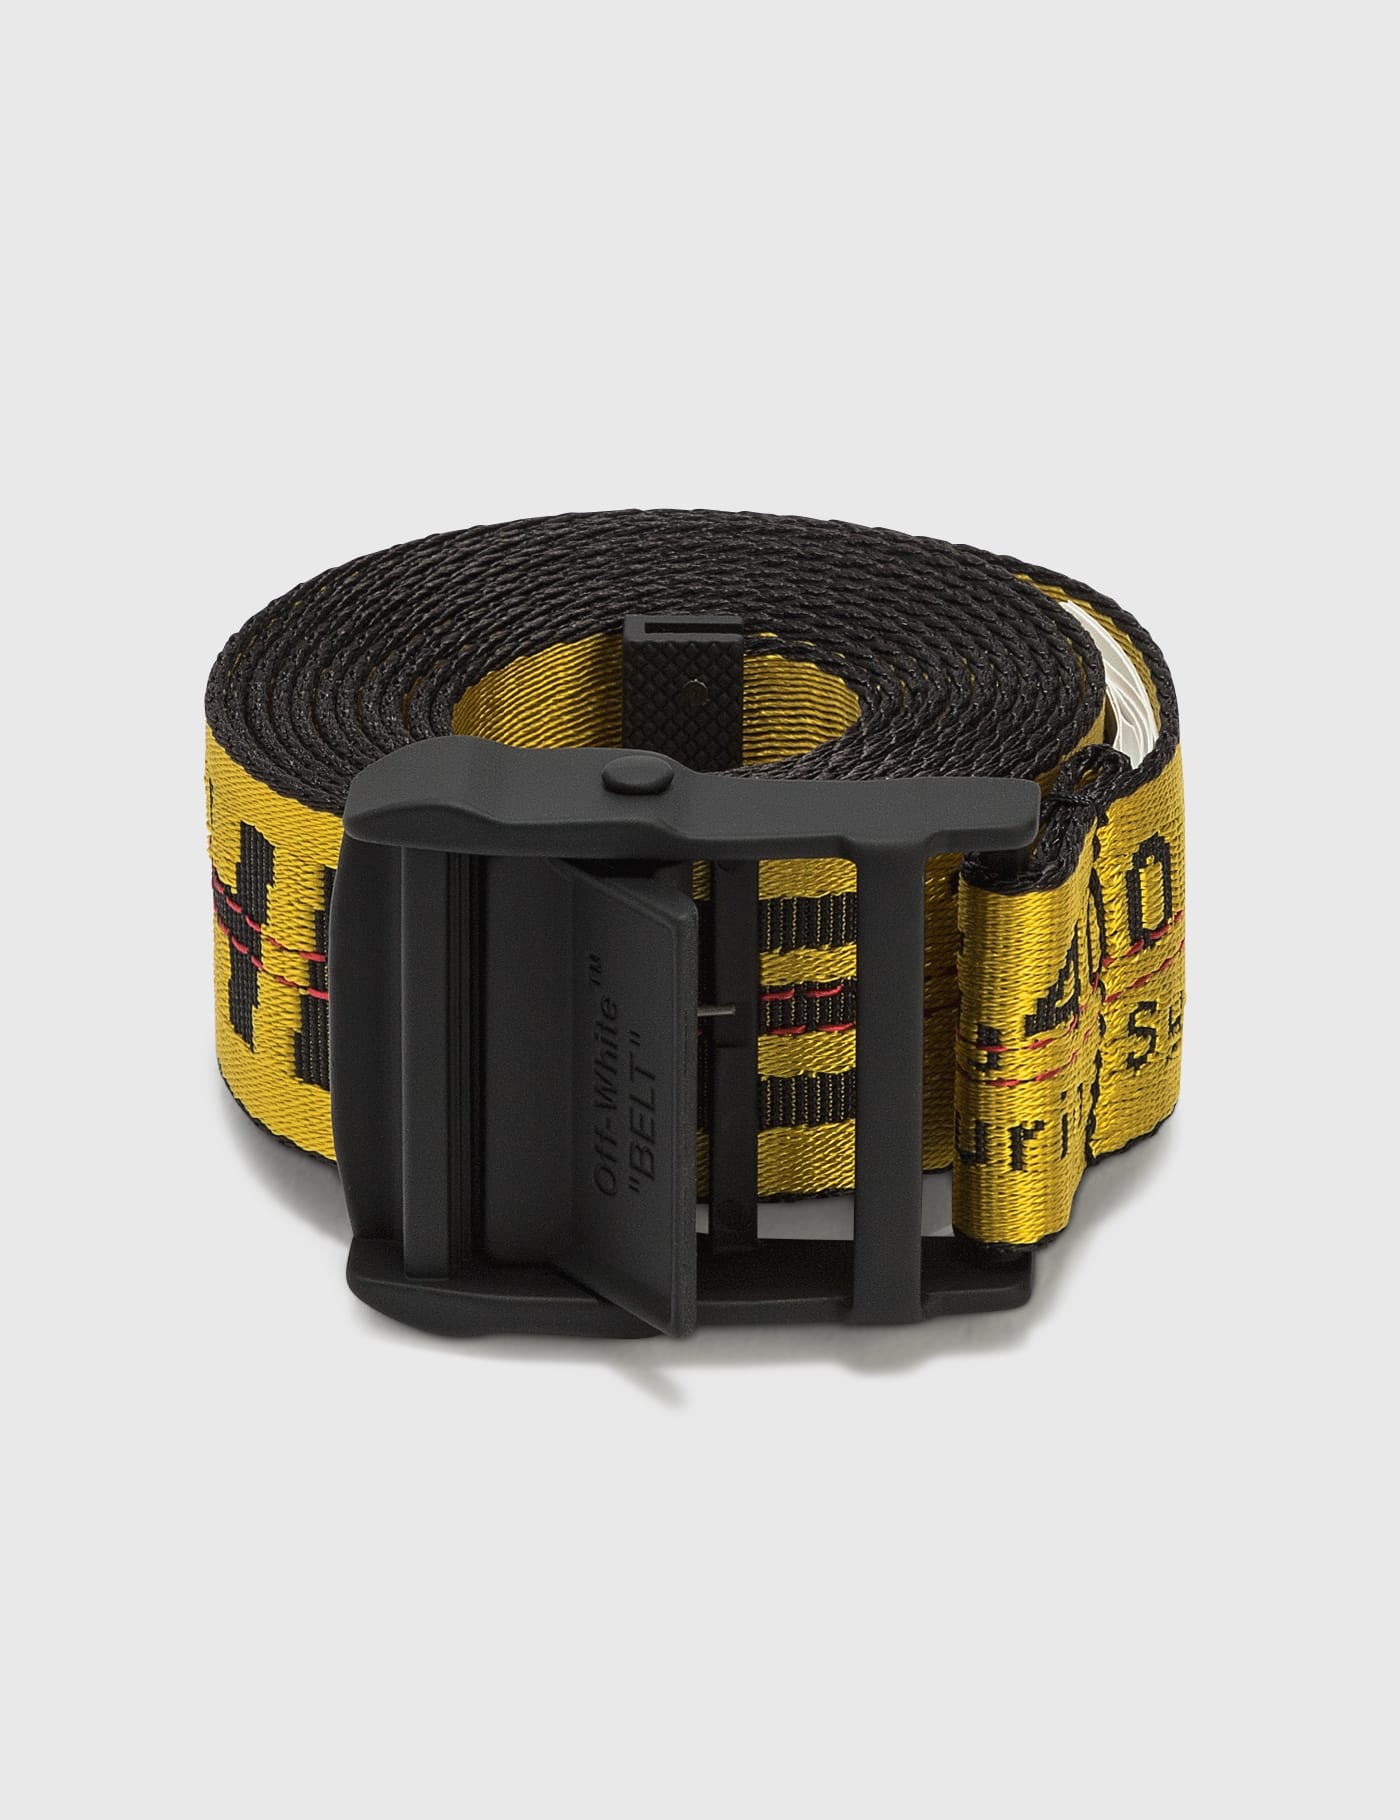 Off White™   Classic Industrial Belt   HBX   Globally Curated